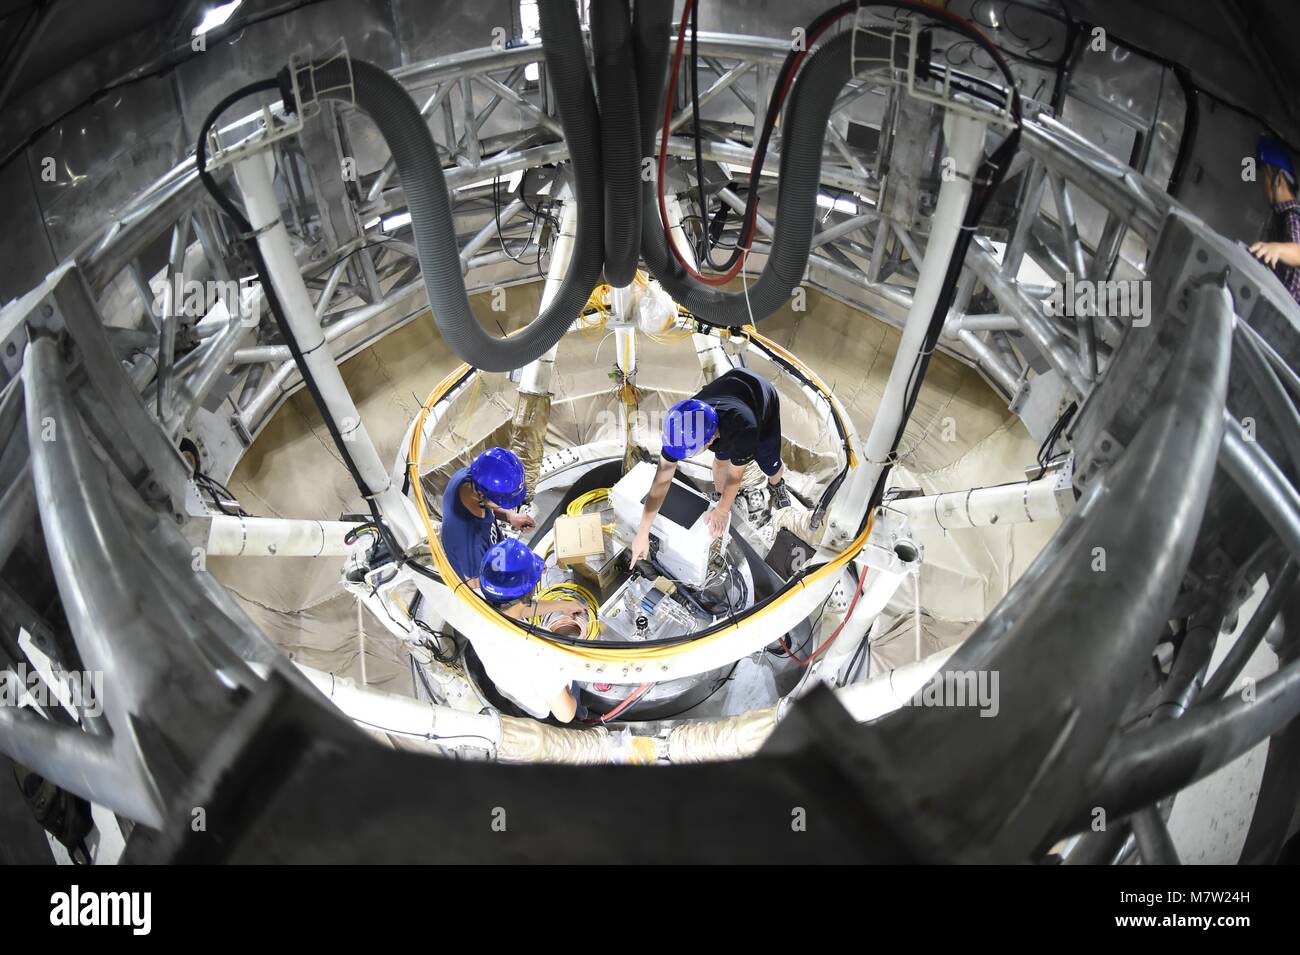 (180313) -- GUIYANG, March 13, 2018 (Xinhua) -- File photo taken on Aug. 10, 2017, shows staff members working in the feed cabin of the Five-hundred-meter Aperture Spherical Radio Telescope (FAST) in Pingtang County, southwest China's Guizhou Province. China's FAST, the world's largest single-dish radio telescope, has discovered 11 new pulsars so far, the National Astronomical Observatories of China (NAOC) said Tuesday. (Xinhua/Ou Dongqu)(wsw) Stock Photo